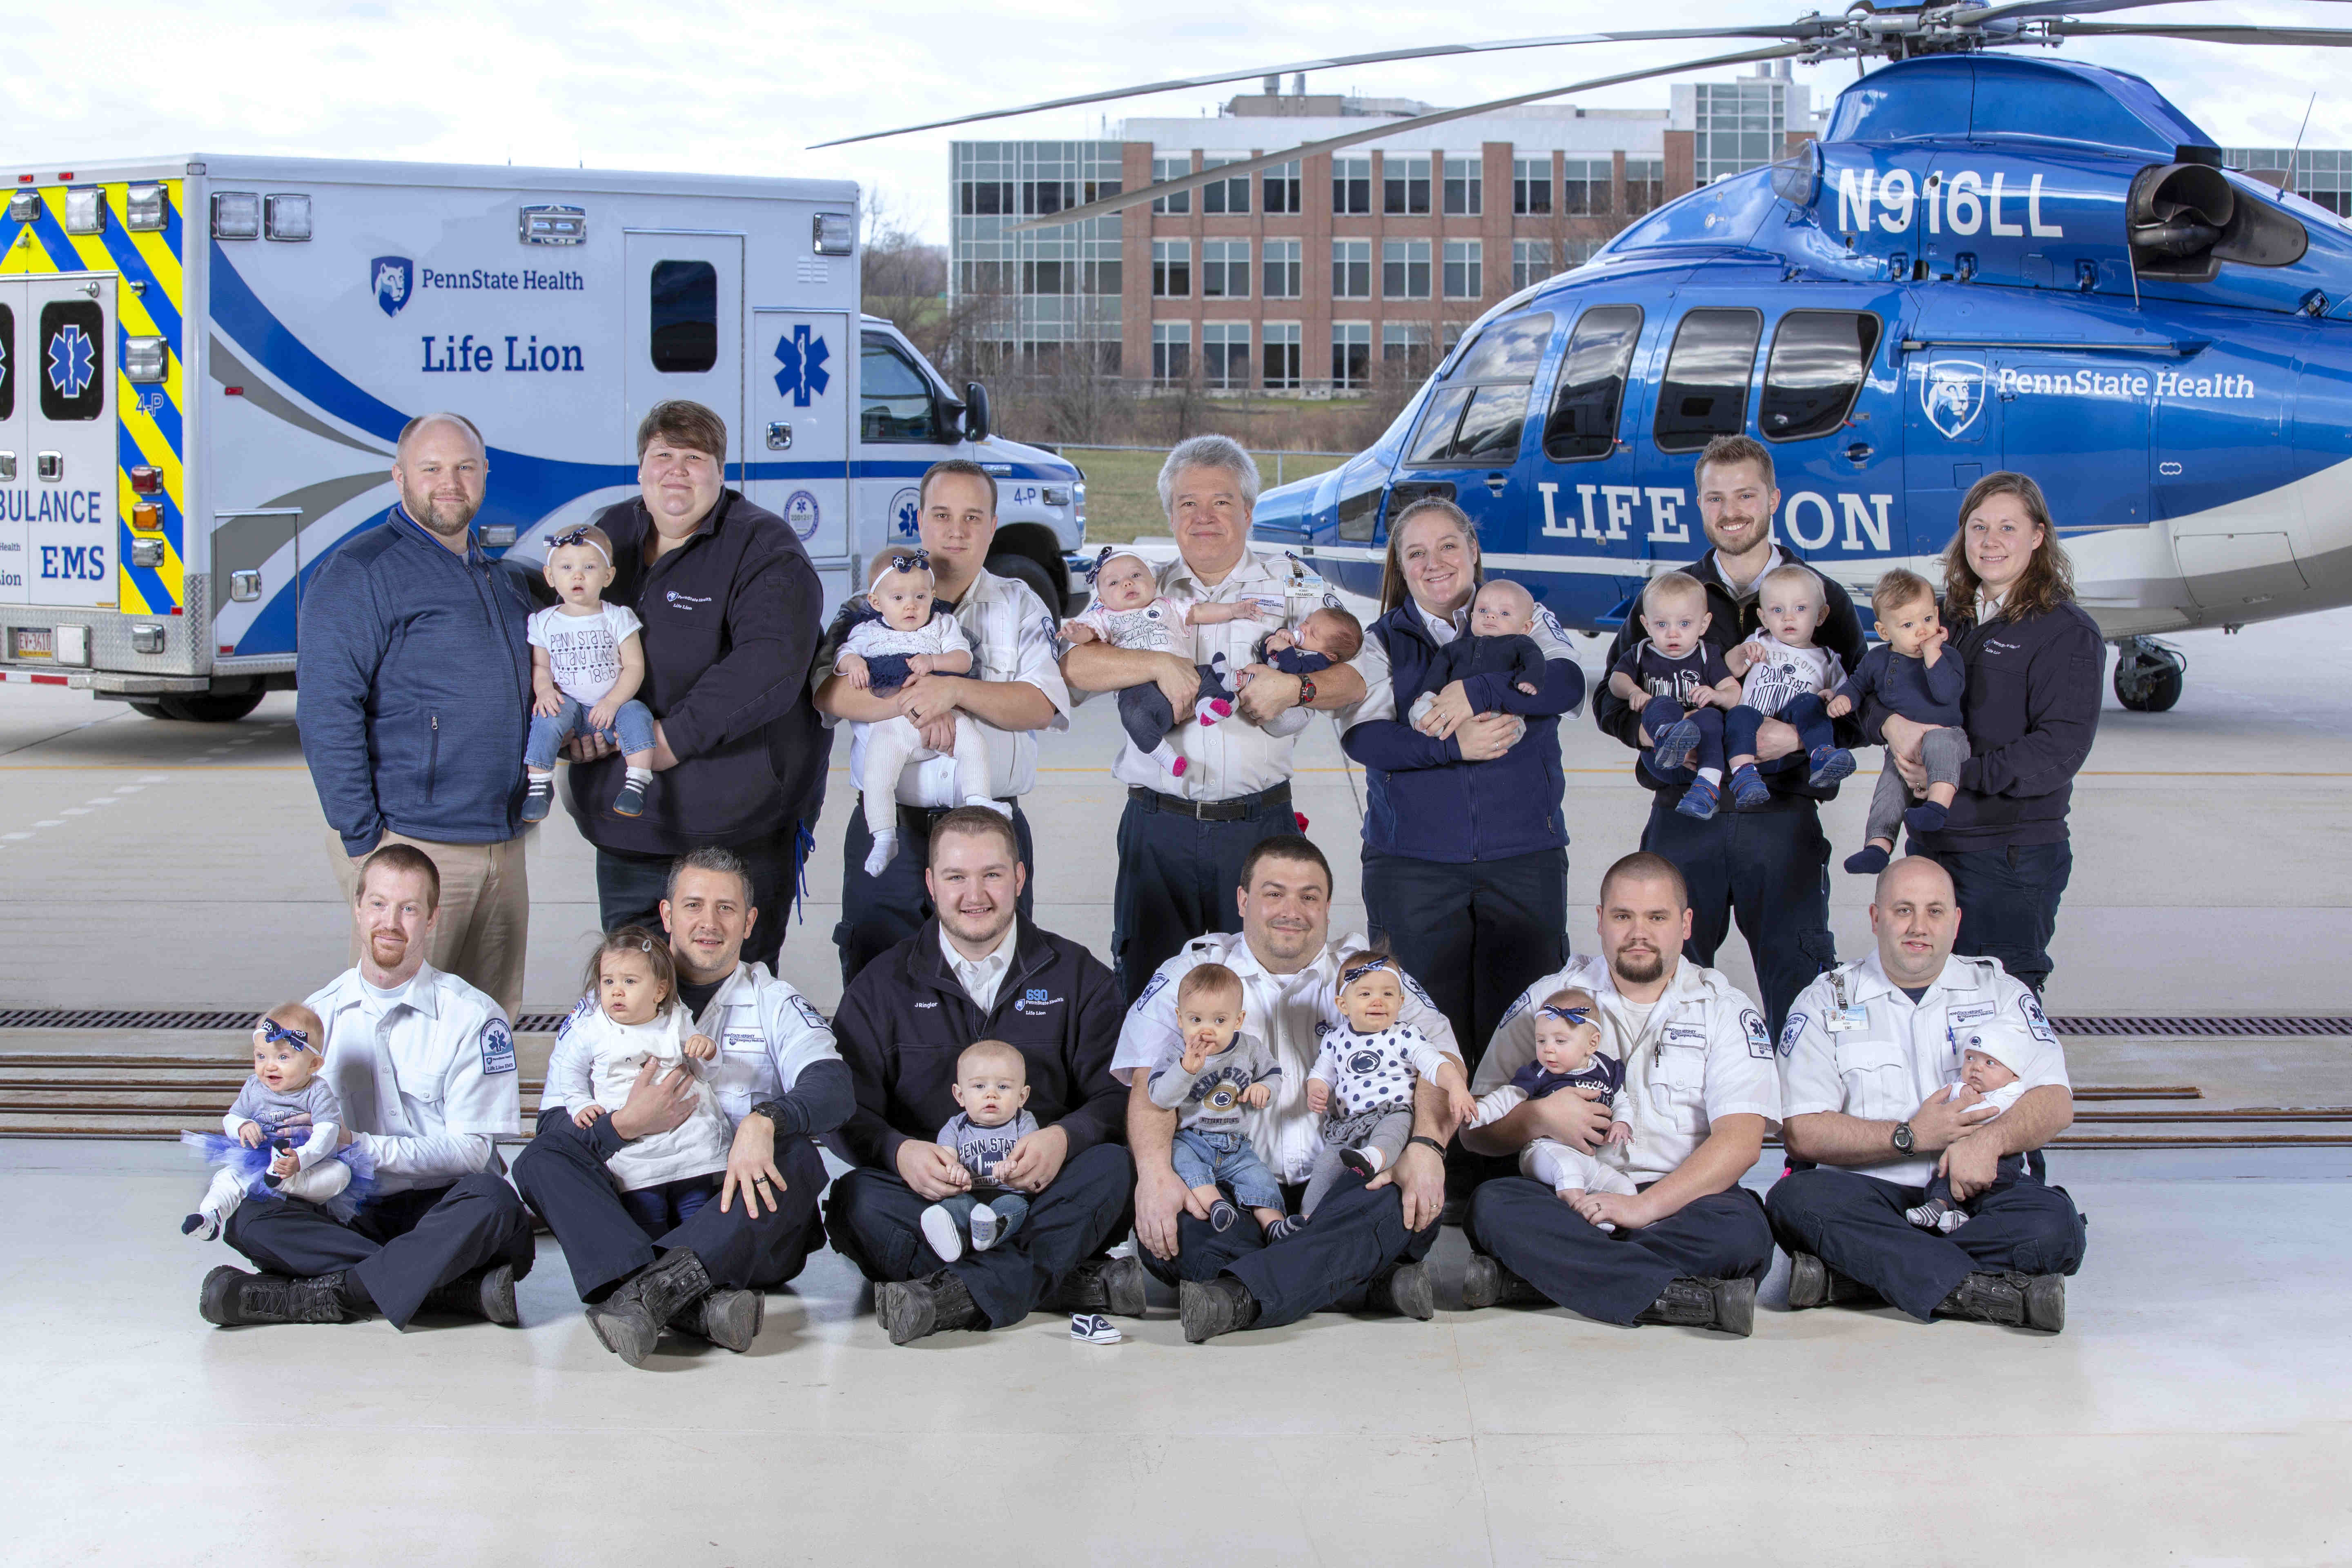 Thirteen adults pose for a photo, holding a total of 15 one-year-old children. In the near background is a Life Lion ambulance and a Life Lion helicopter. In the distant background is a brick building with dark windows.